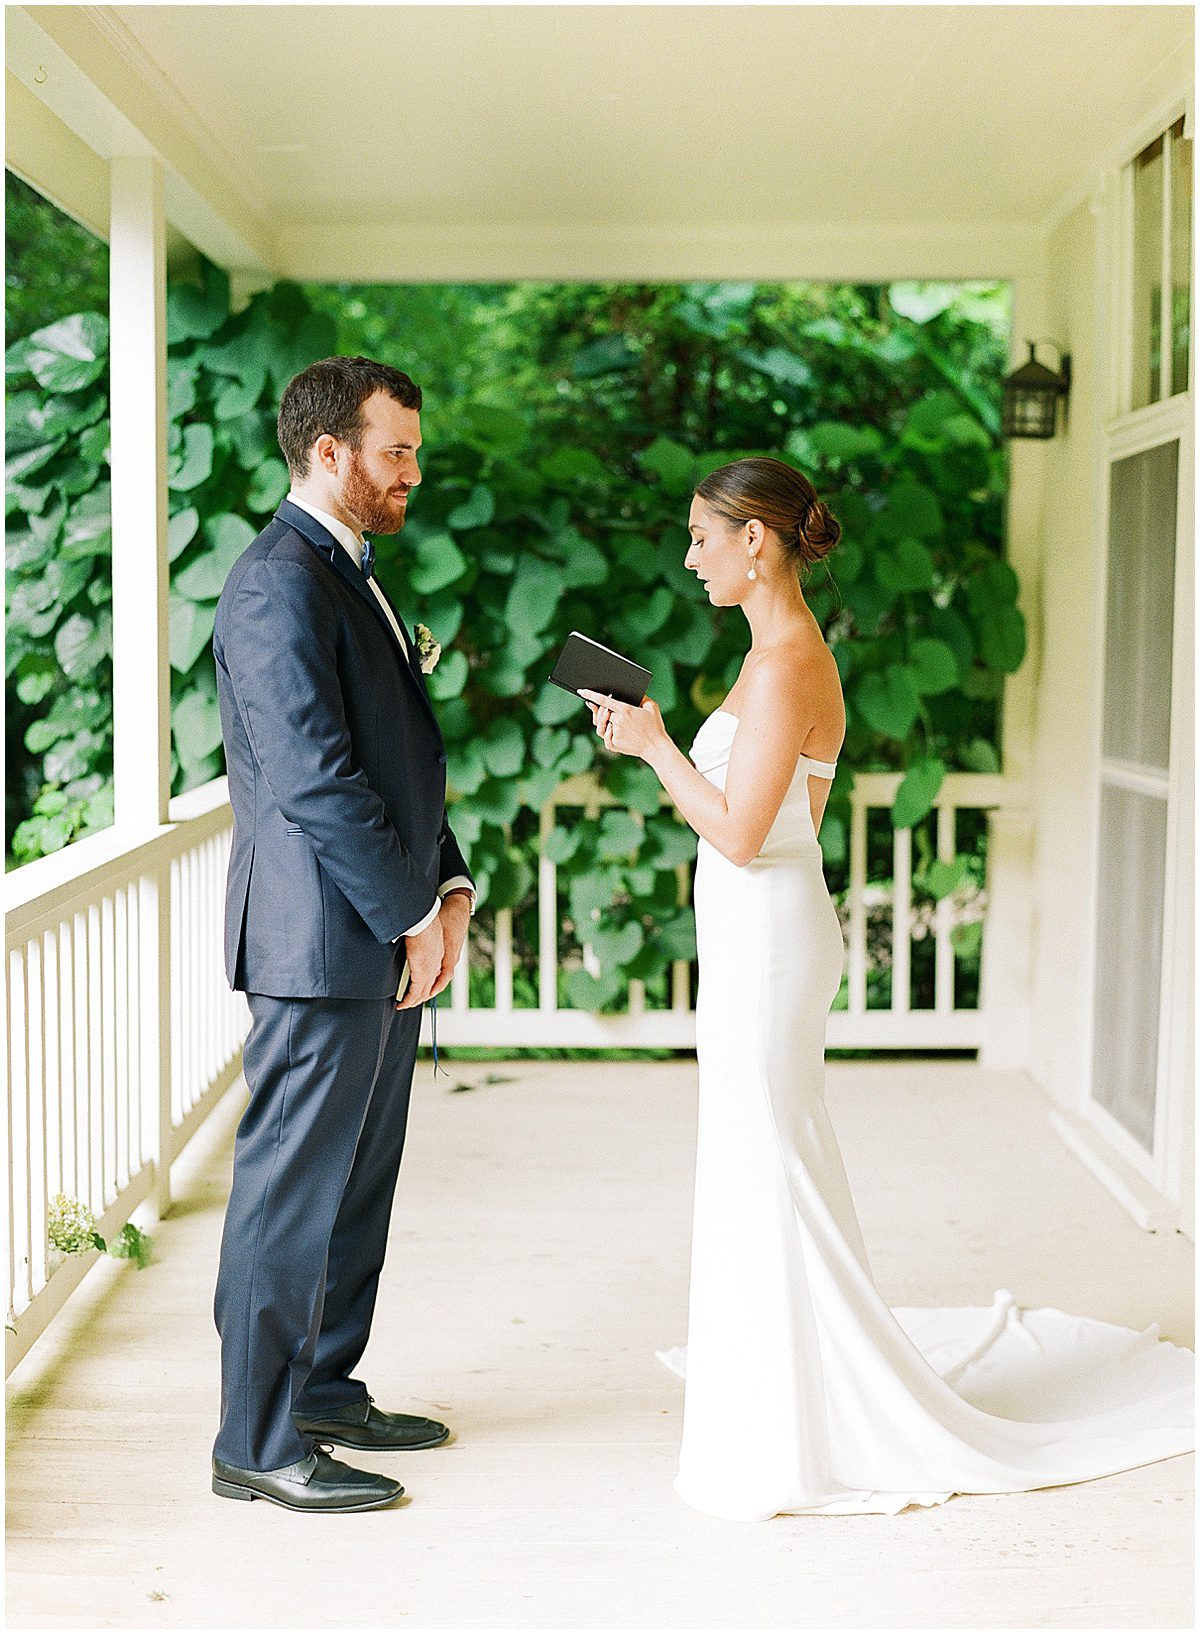 Bride and Groom Sharing Vows on Porch Photo